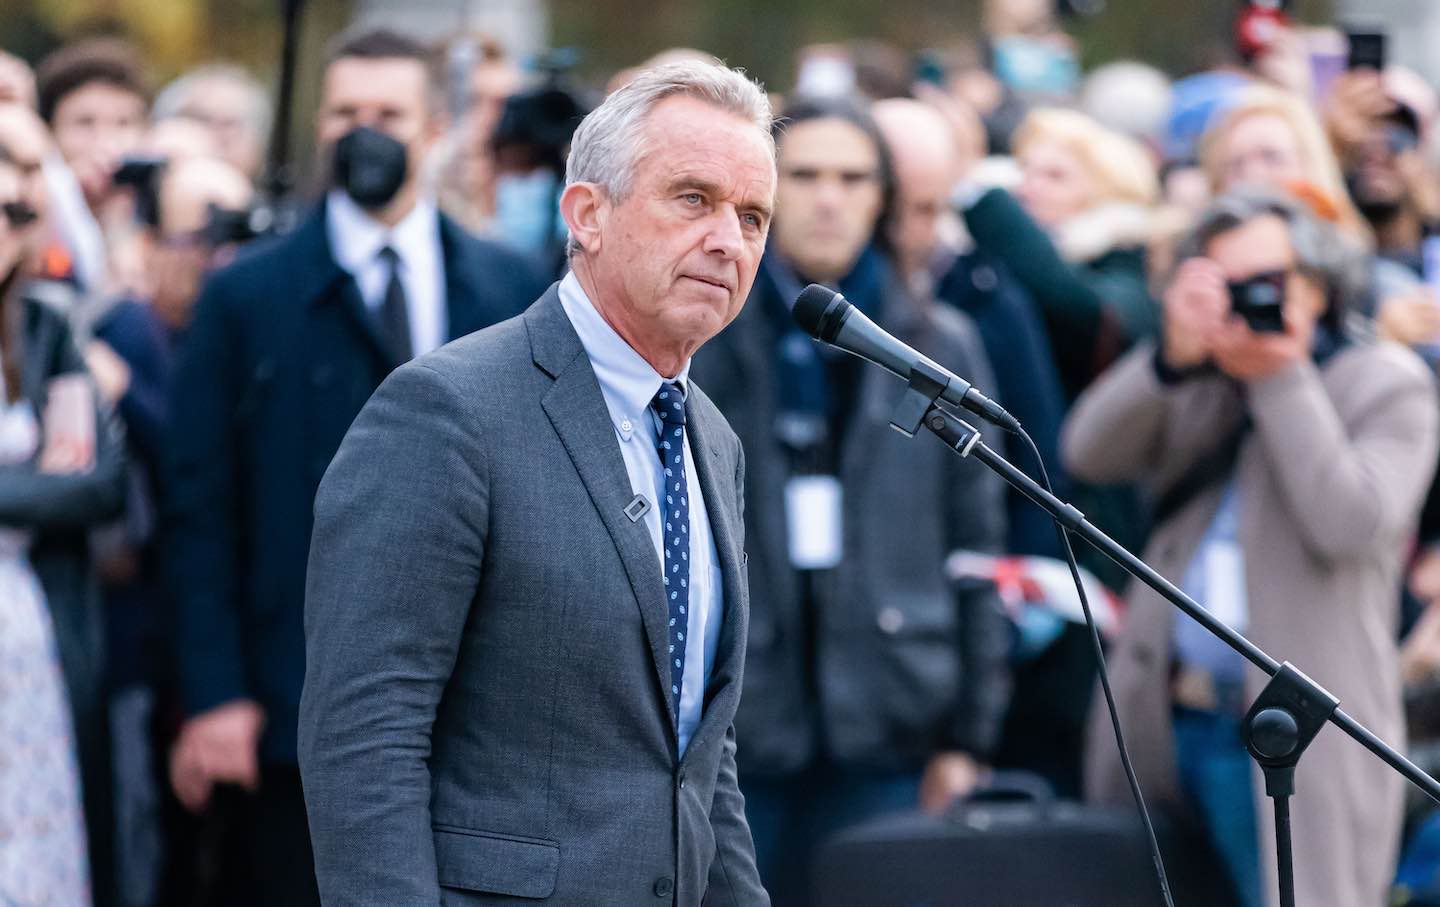 Robert F. Kennedy Jr. Bets on New Hampshire to Boost a Very Unlikely